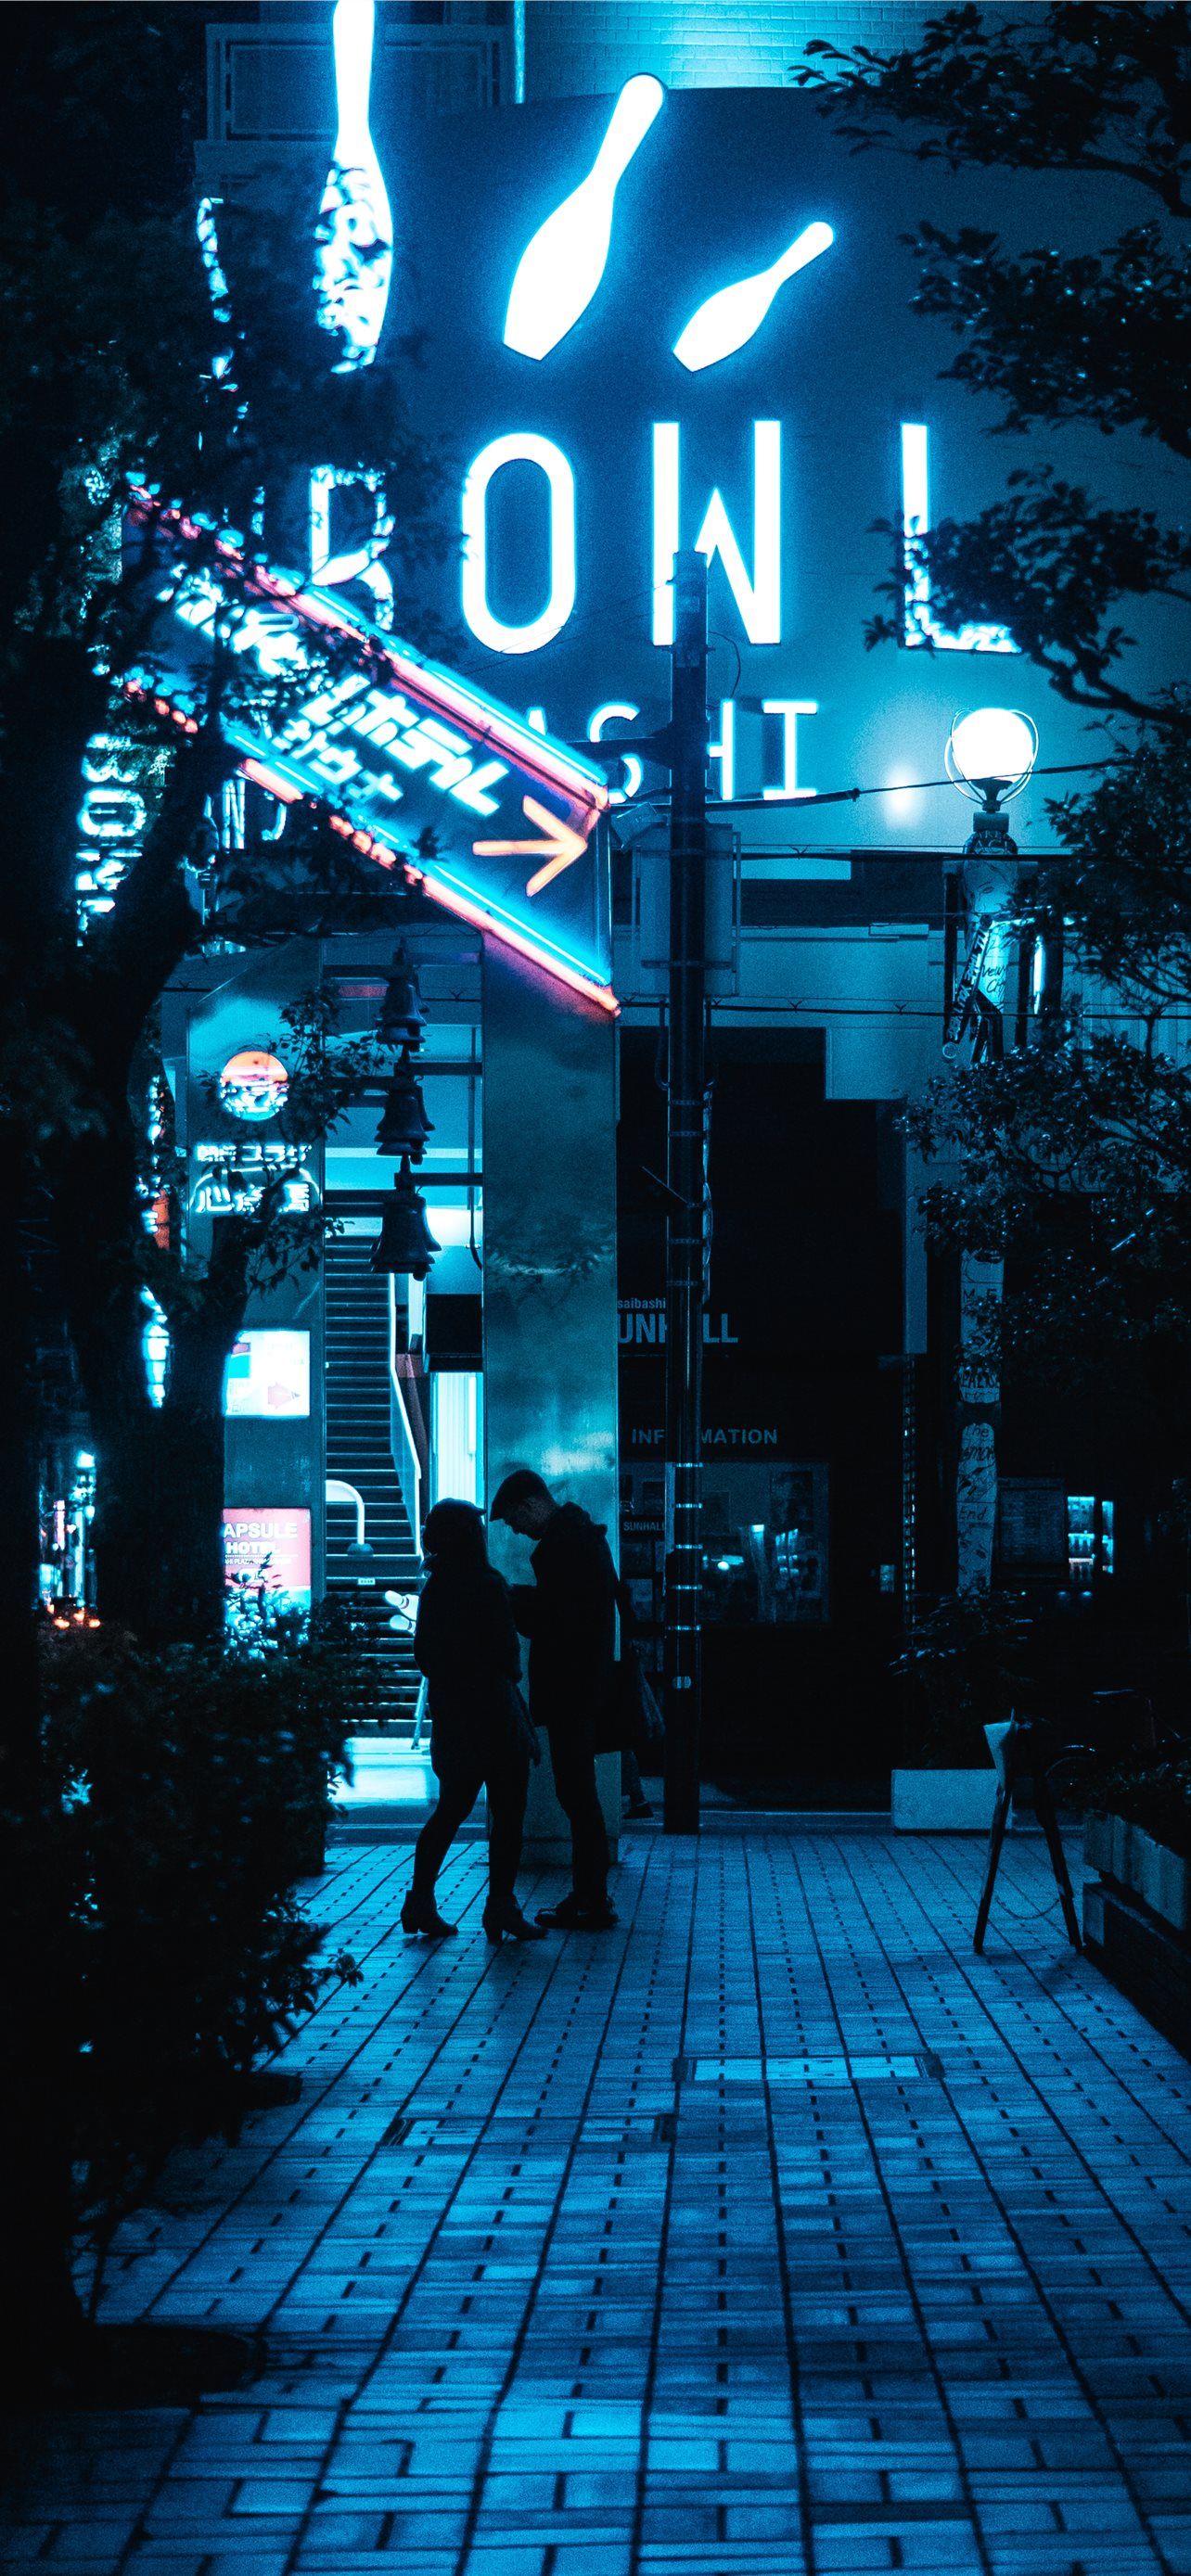 A couple walks down a street at night with a neon sign in the background. - Japan